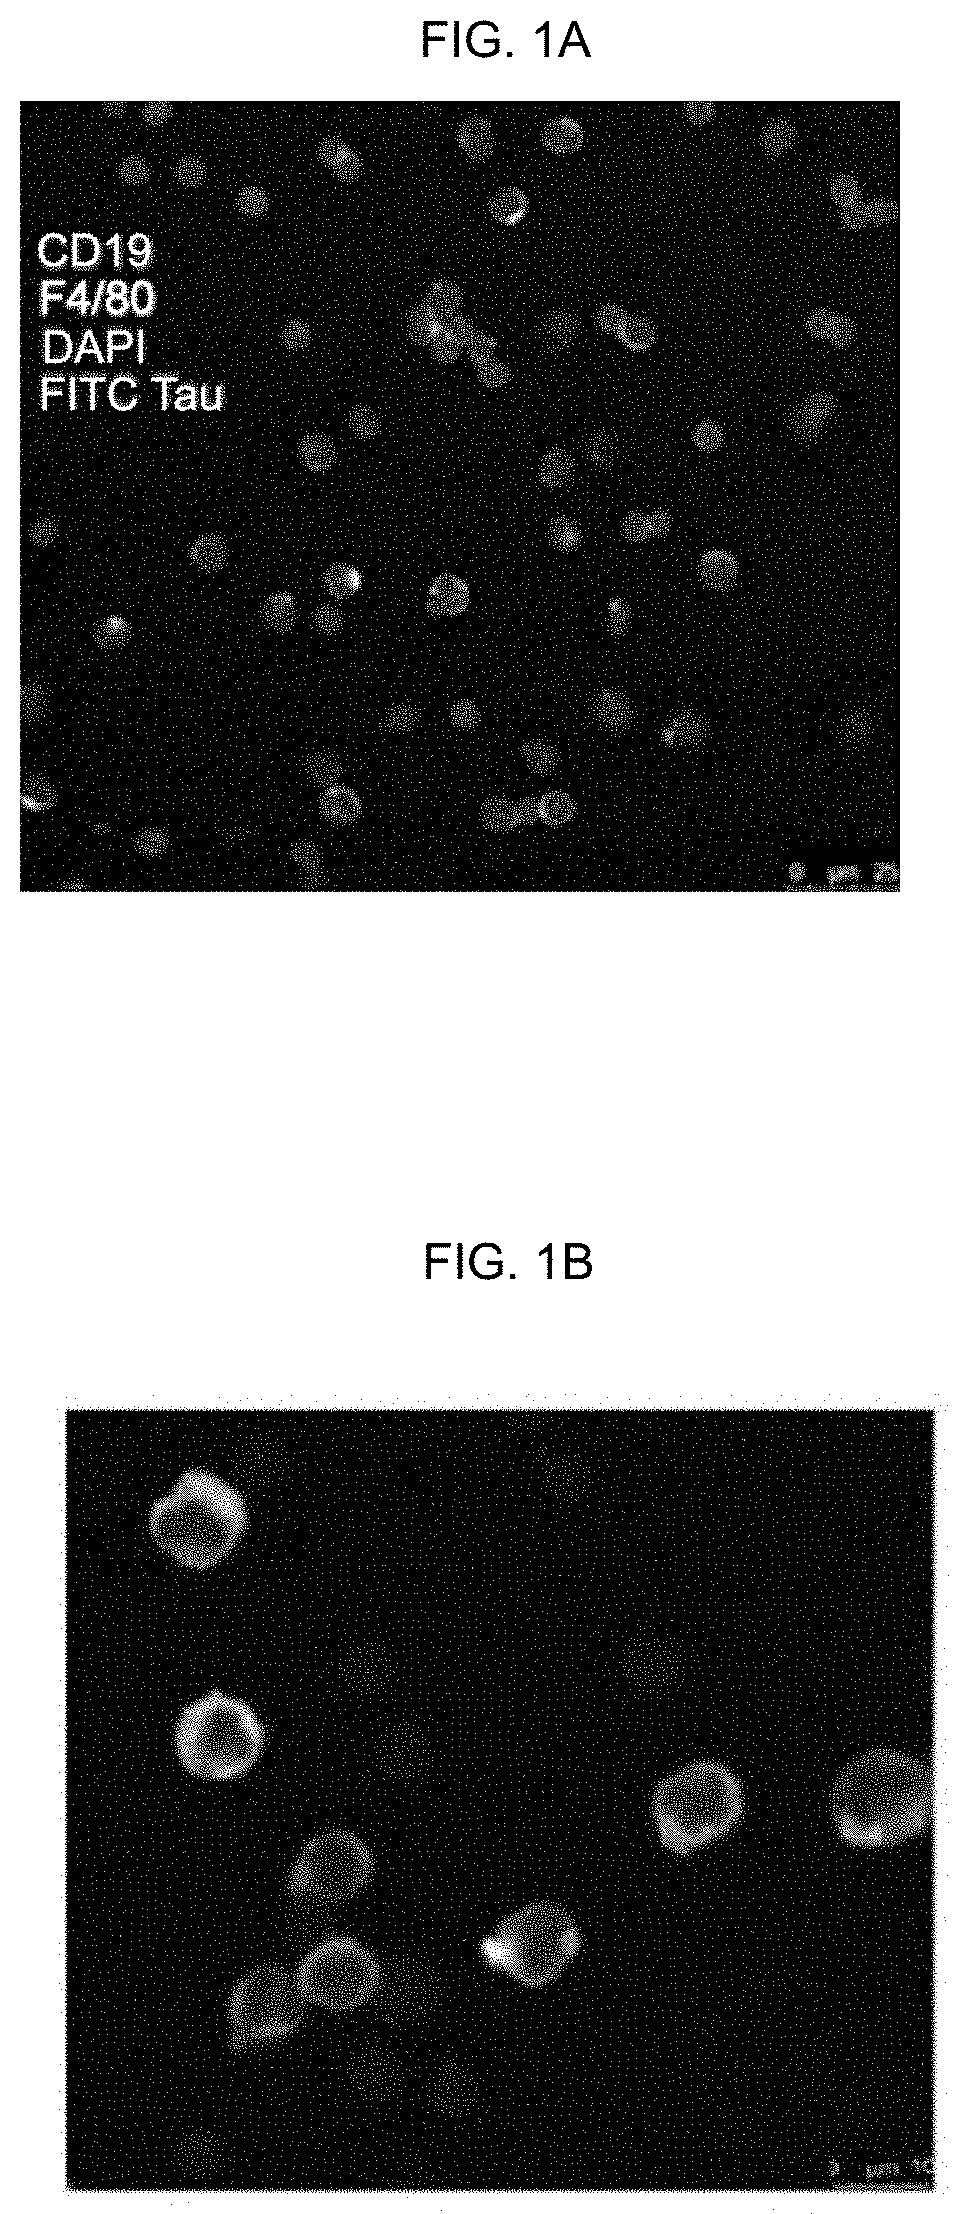 B-1a lymphocyte and/or macrophage targeting and activation to treat medical conditions with inflammatory or autoimmune components